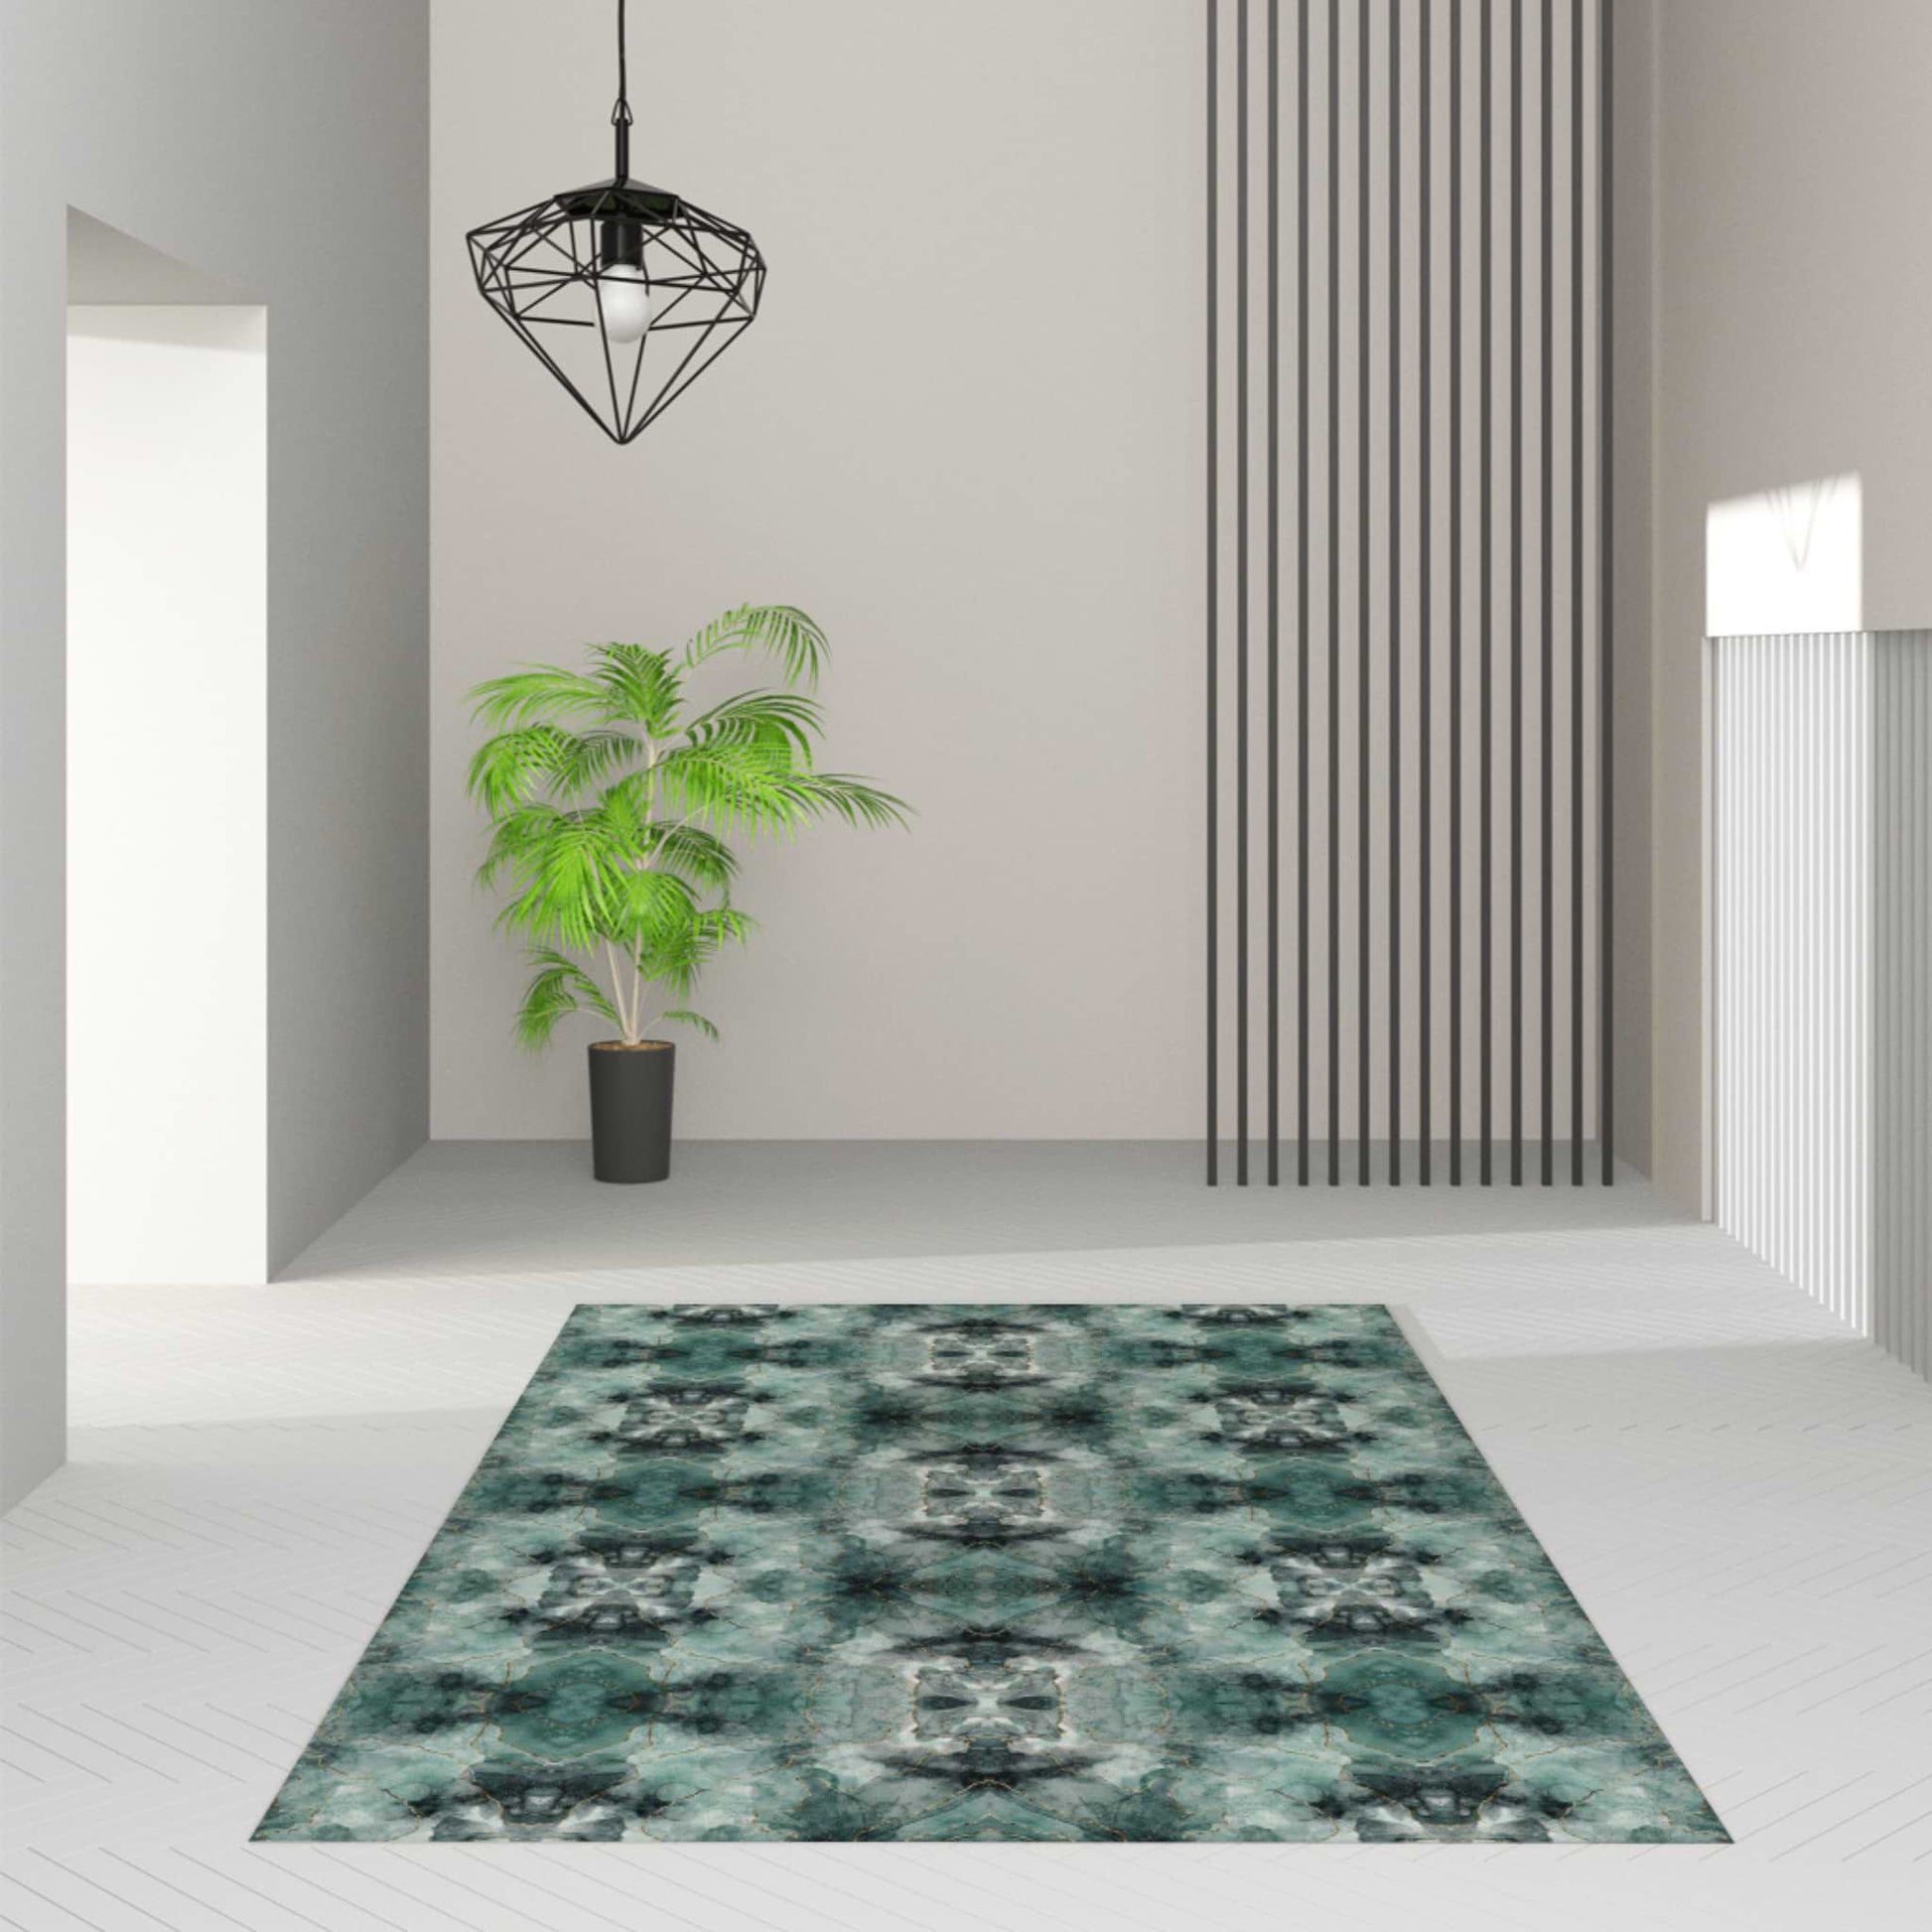 Green Chroma Area Rugs - ZumBuys